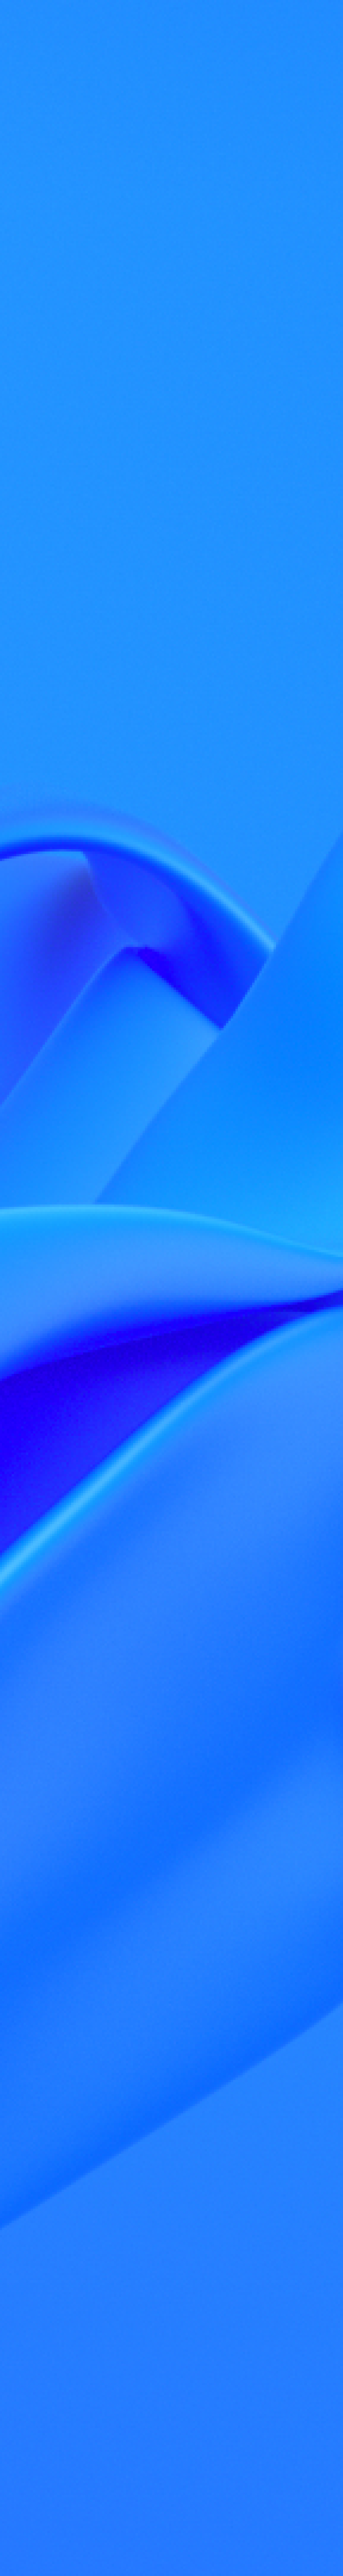 800x6000 Resolution Windows 11 Style Abstract 800x6000 Resolution ...